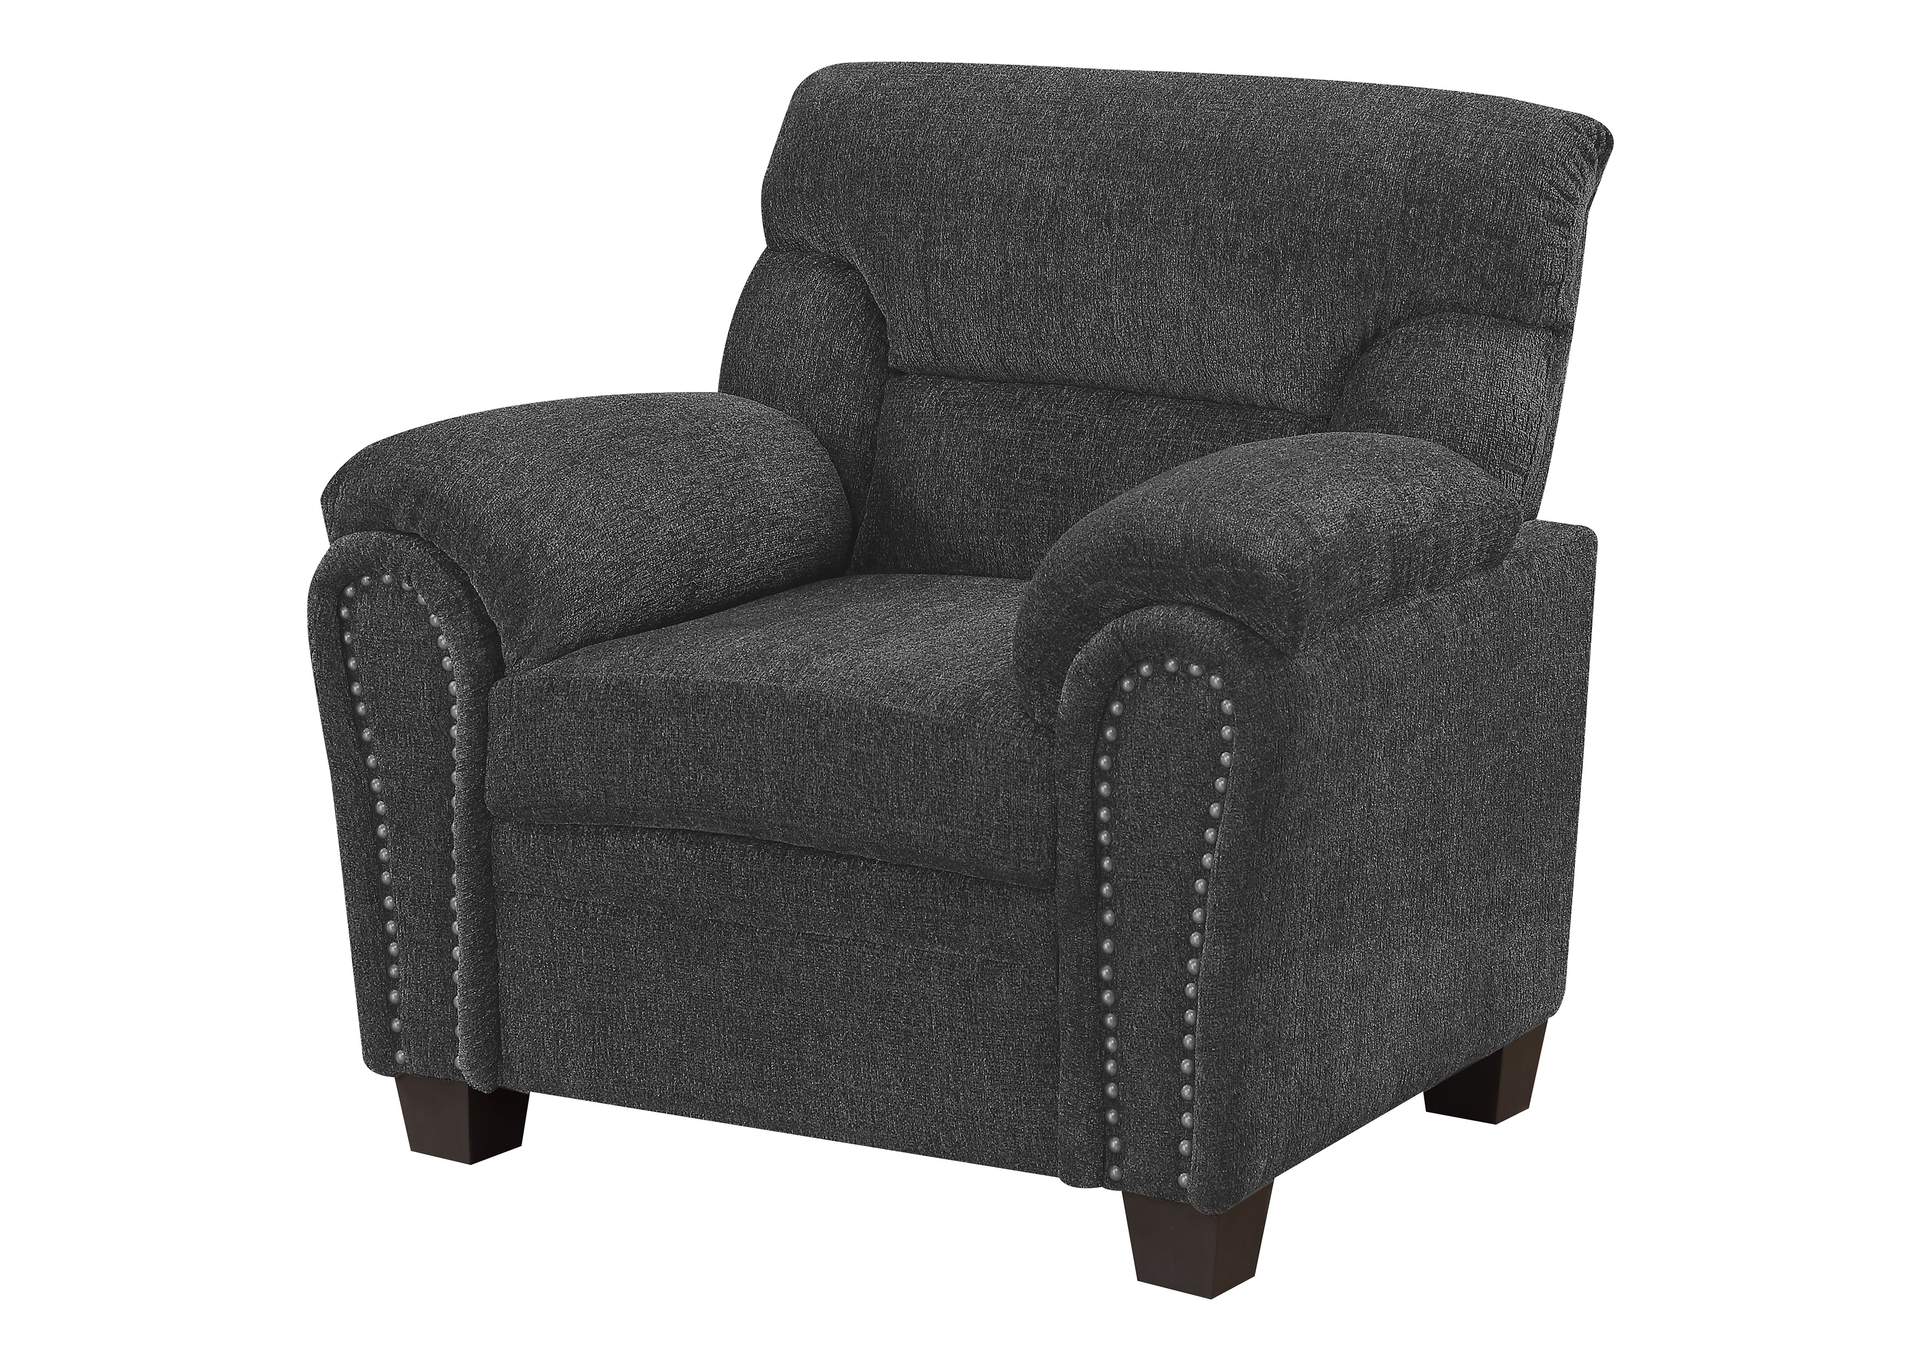 Clementine Upholstered Chair with Nailhead Trim Grey,Coaster Furniture